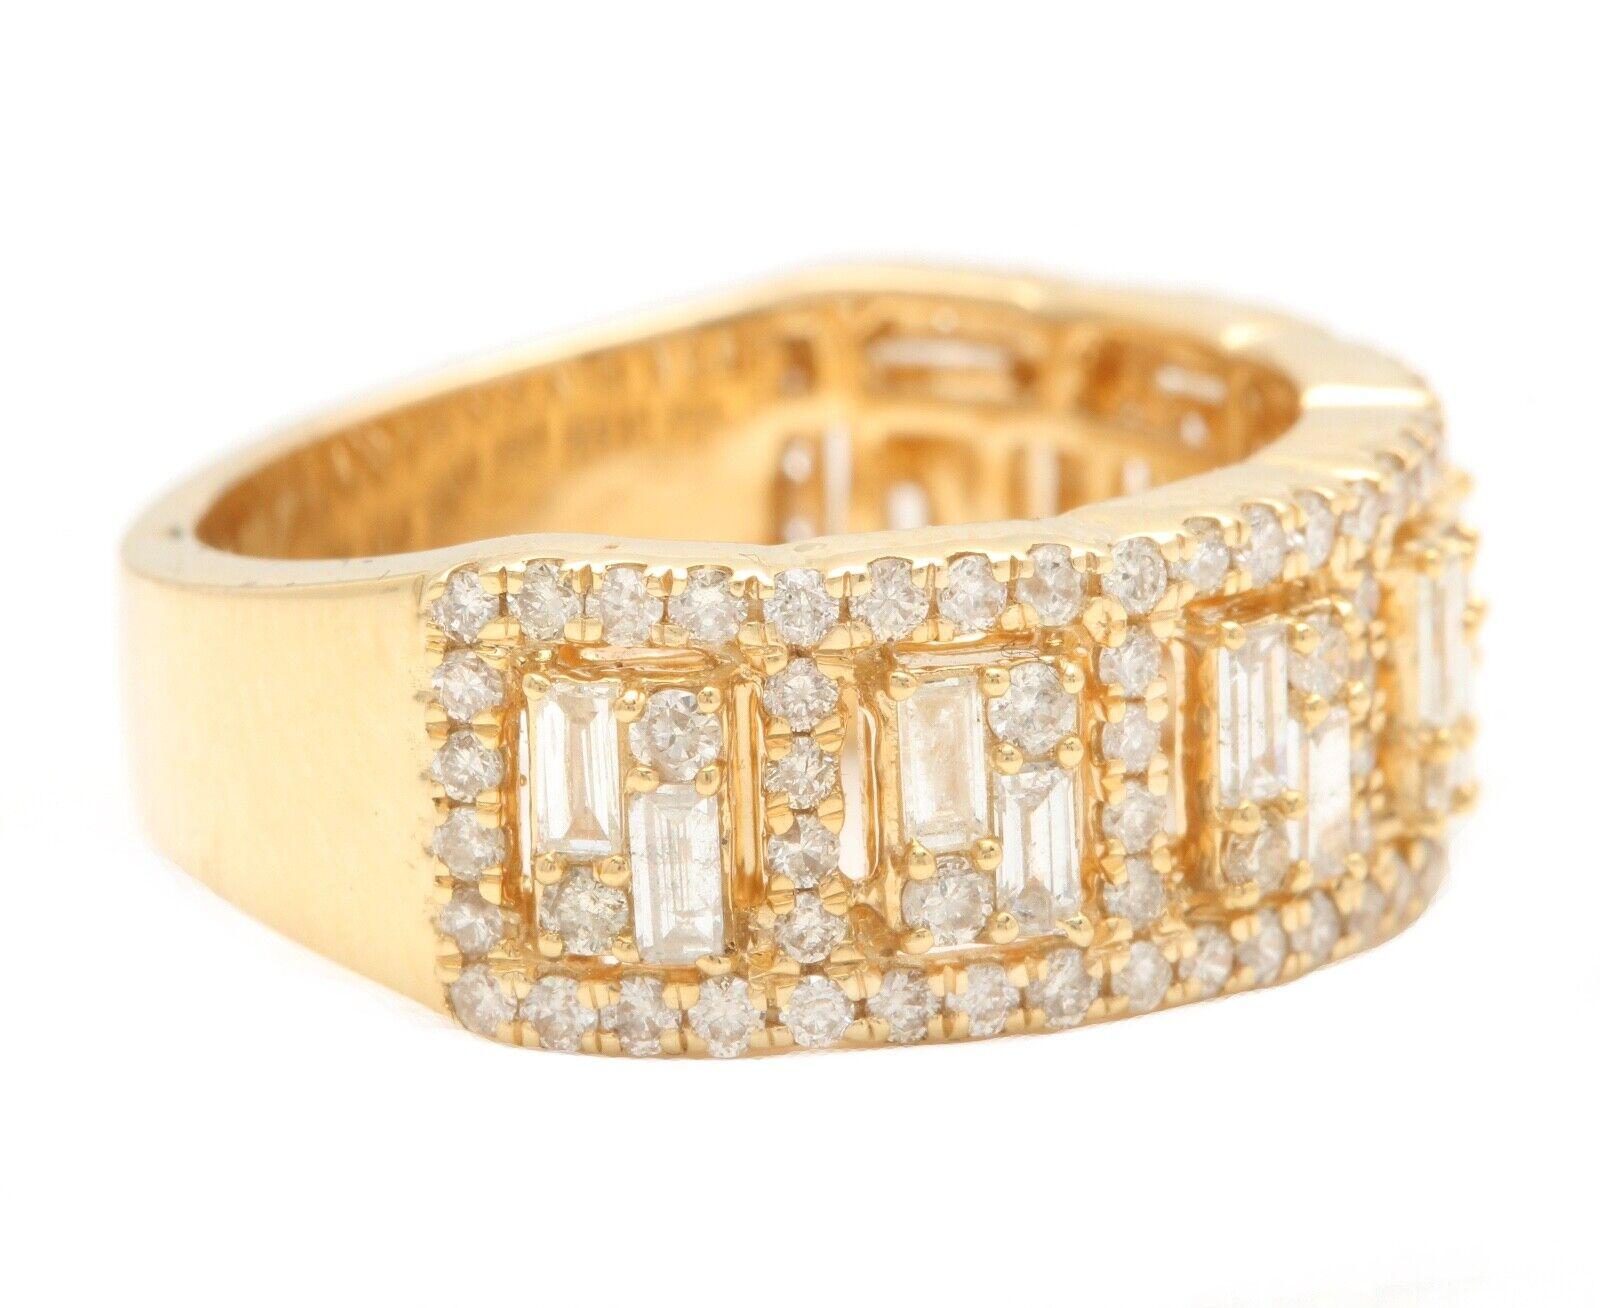 1.70Ct Natural Diamond 14K Solid Yellow Gold Men's Ring

Amazing looking piece!

Suggested Replacement Value Approx. 6,000.00

Total Natural Round Cut Diamonds Weight: Approx. 1.70 Carats (color H / Clarity SI)

Width of the ring: 8.40 mm

Ring